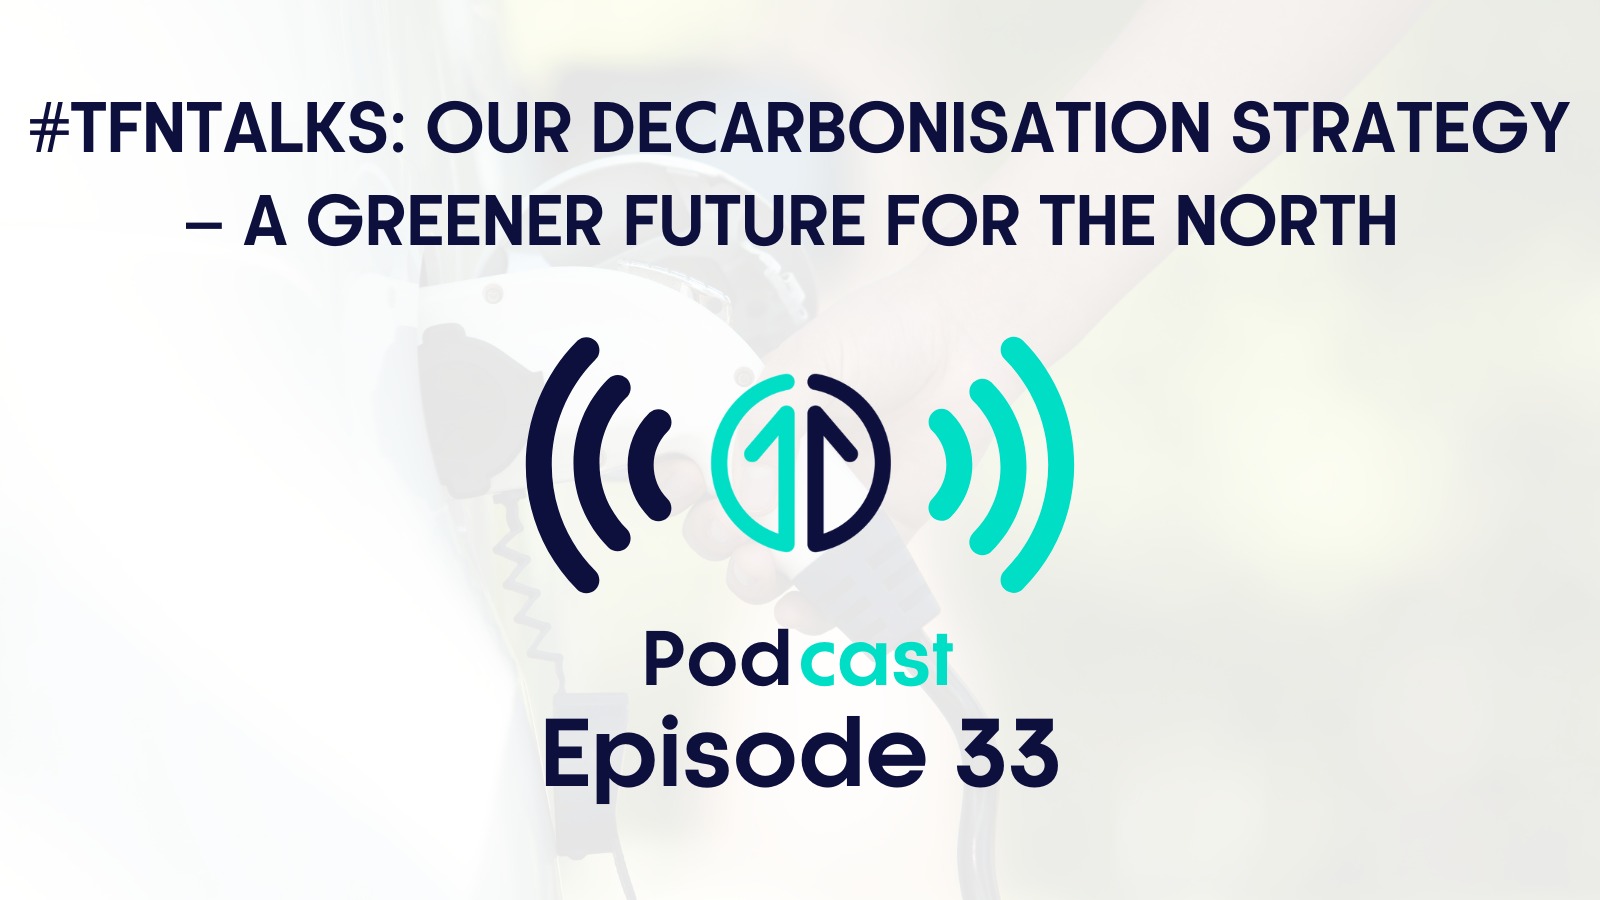 #TfNTalks: Our Decarbonisation Strategy - A greener future for the North | Episode 33